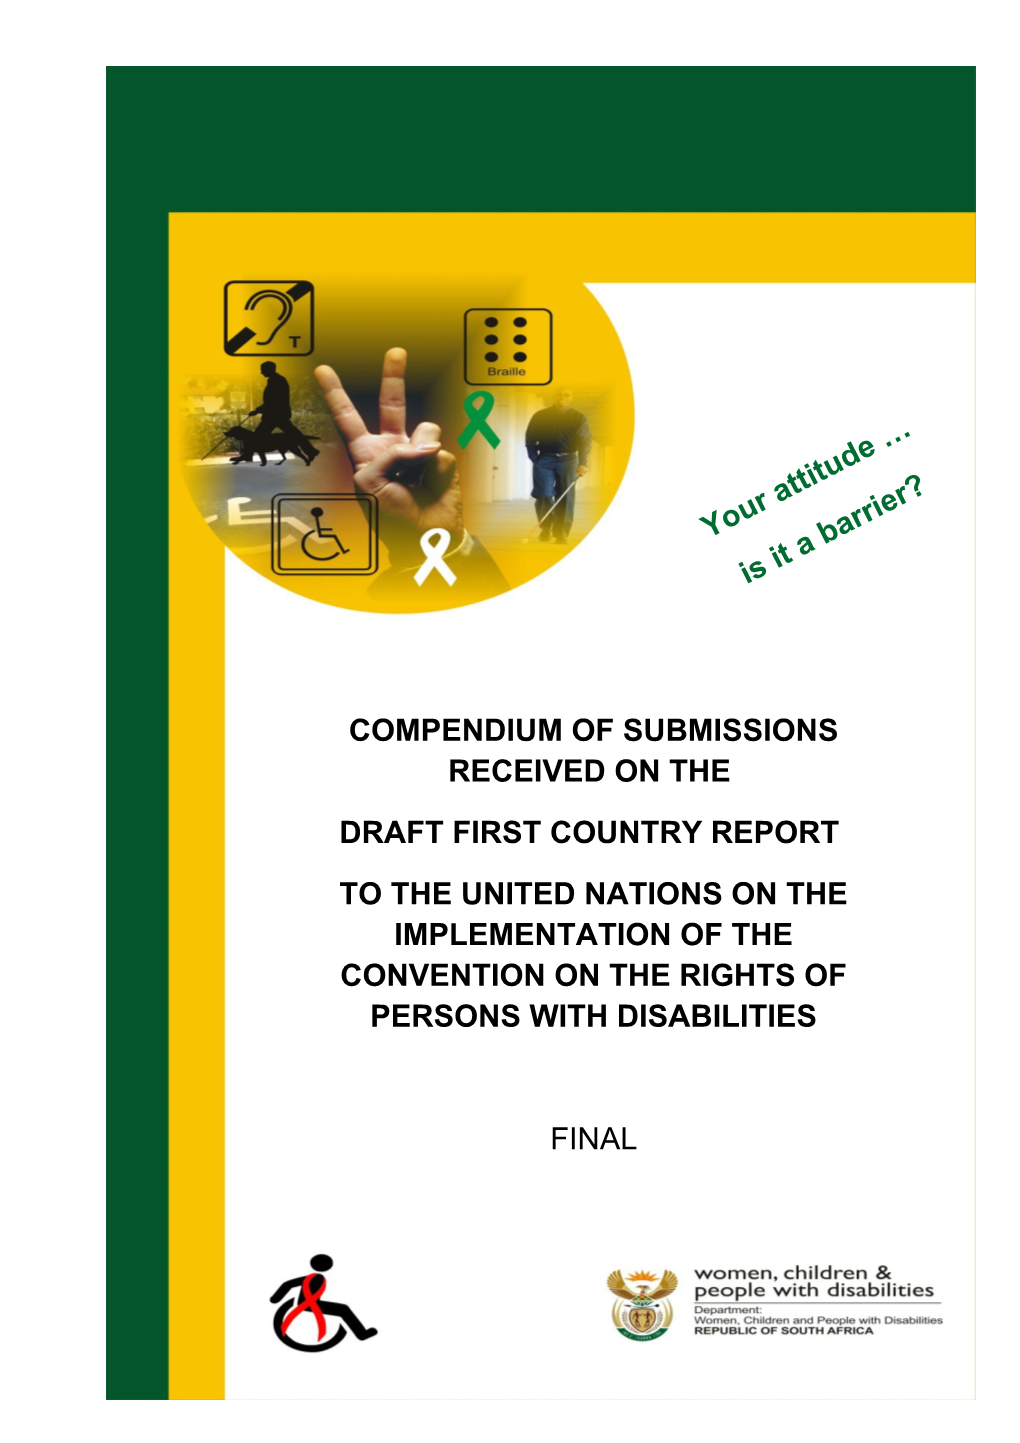 Public Comment on First Draft Country Report